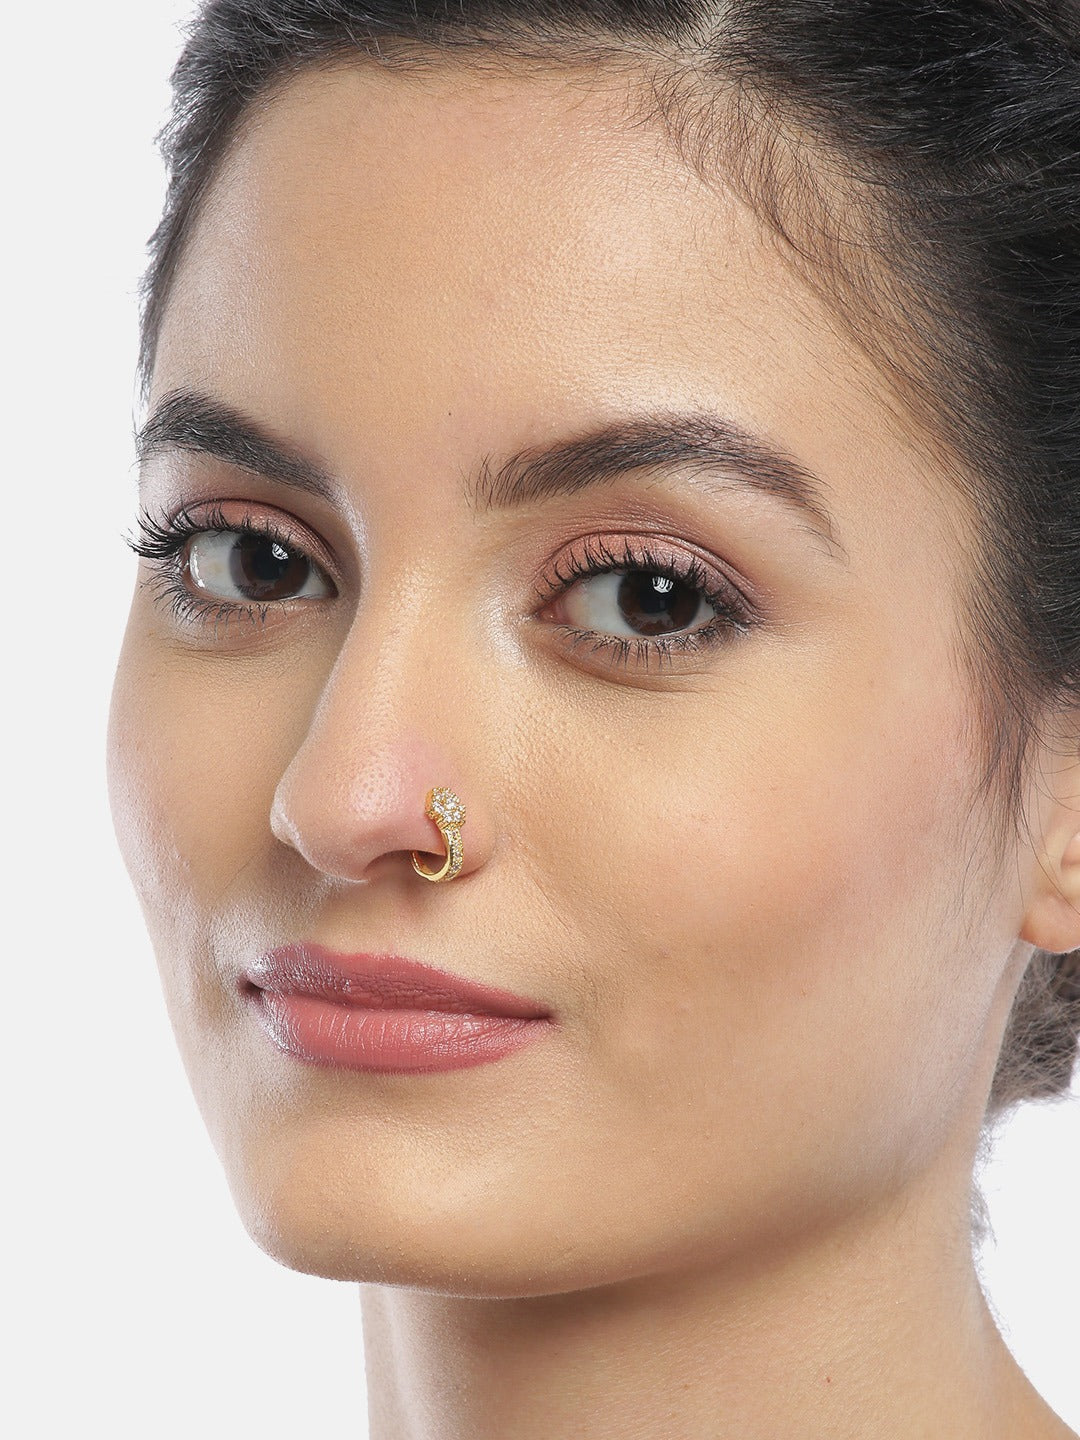 Buy Indian Nose Ring, Gold Nose Ring, Unique Nose Ring, Nose Ring Hoop, 20g Nose  Ring, Piercing Helix, Cartilage Earring, Hippie Piercing Online in India -  Etsy | Unique nose rings, Gold